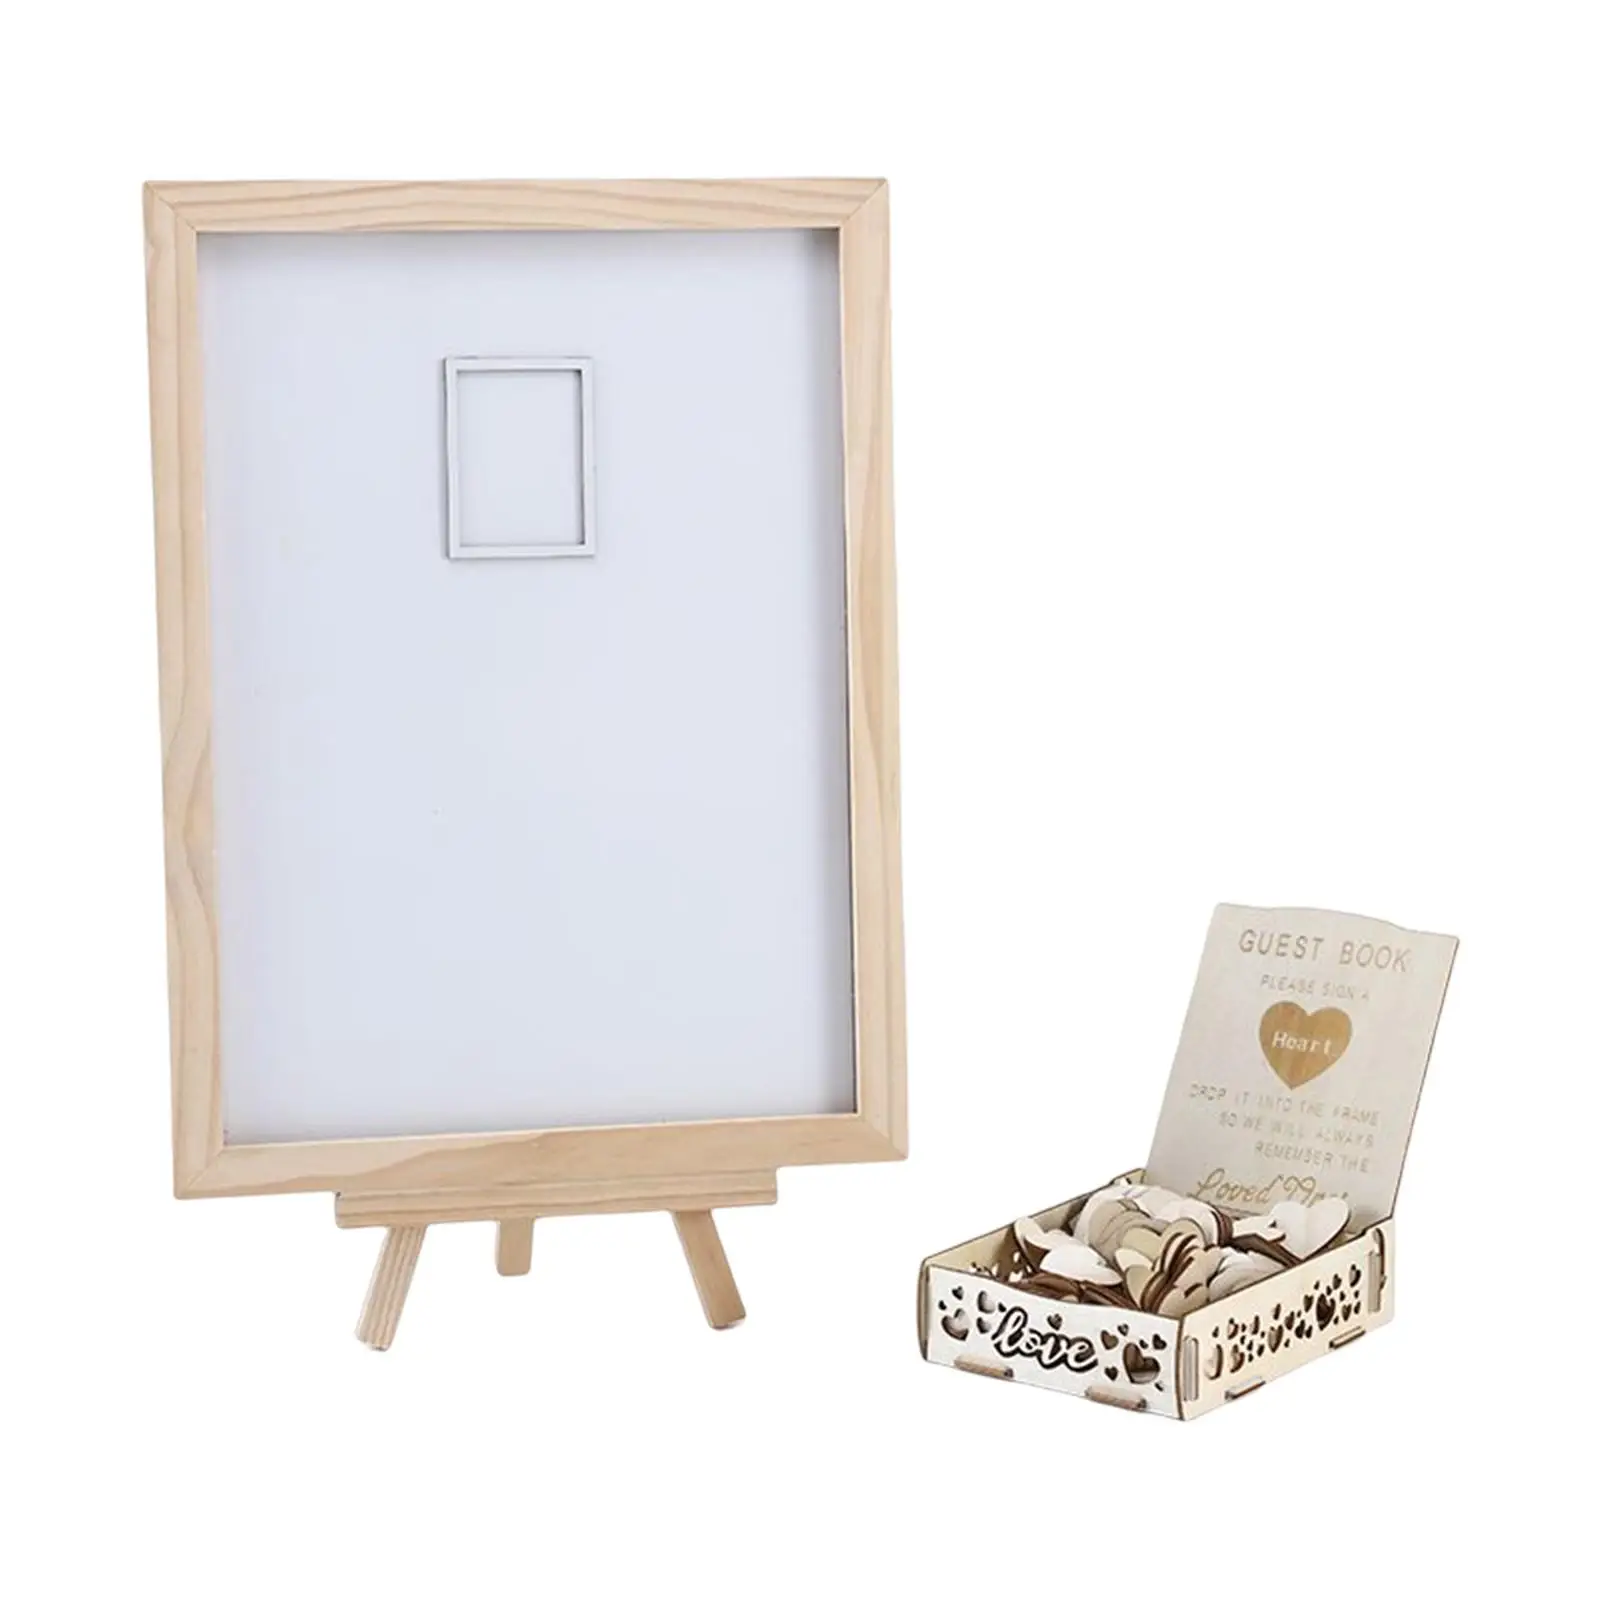 Wedding Guest Book with 80 Wood Hearts Drop Box Baby Shower Birthday Decor